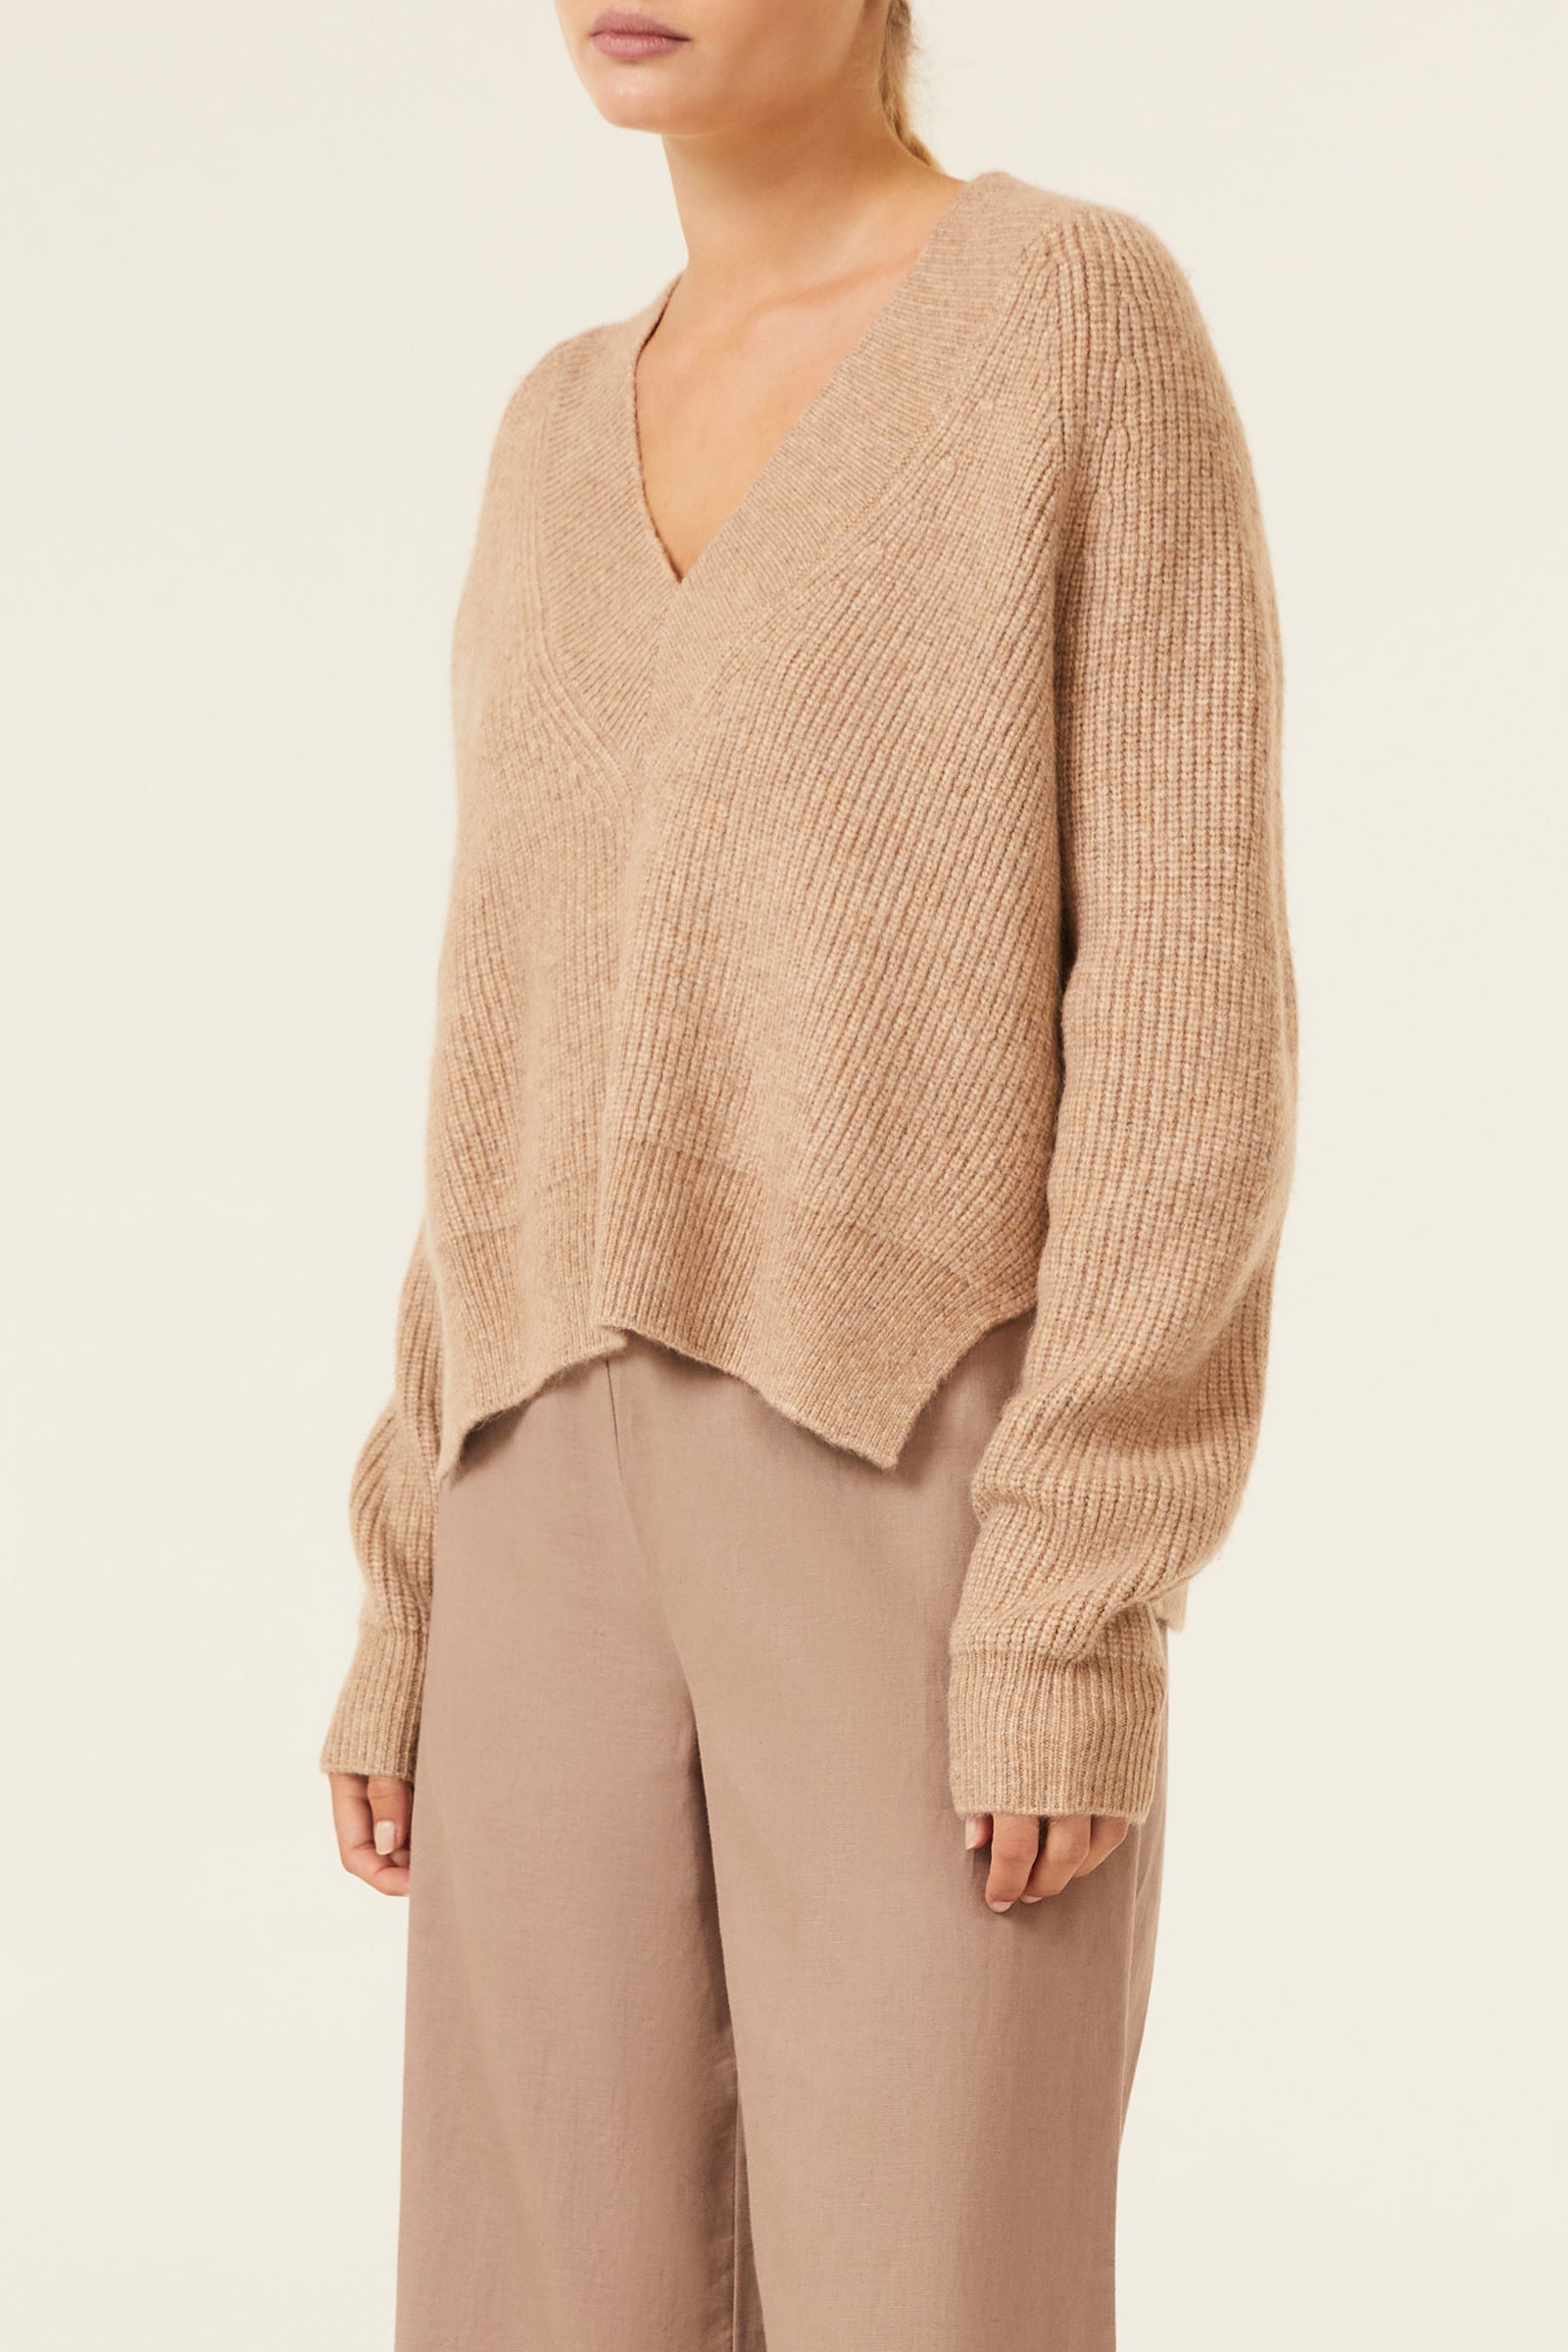 Nude Lucy Mckenzie Knit In a Yellow Sand Colour